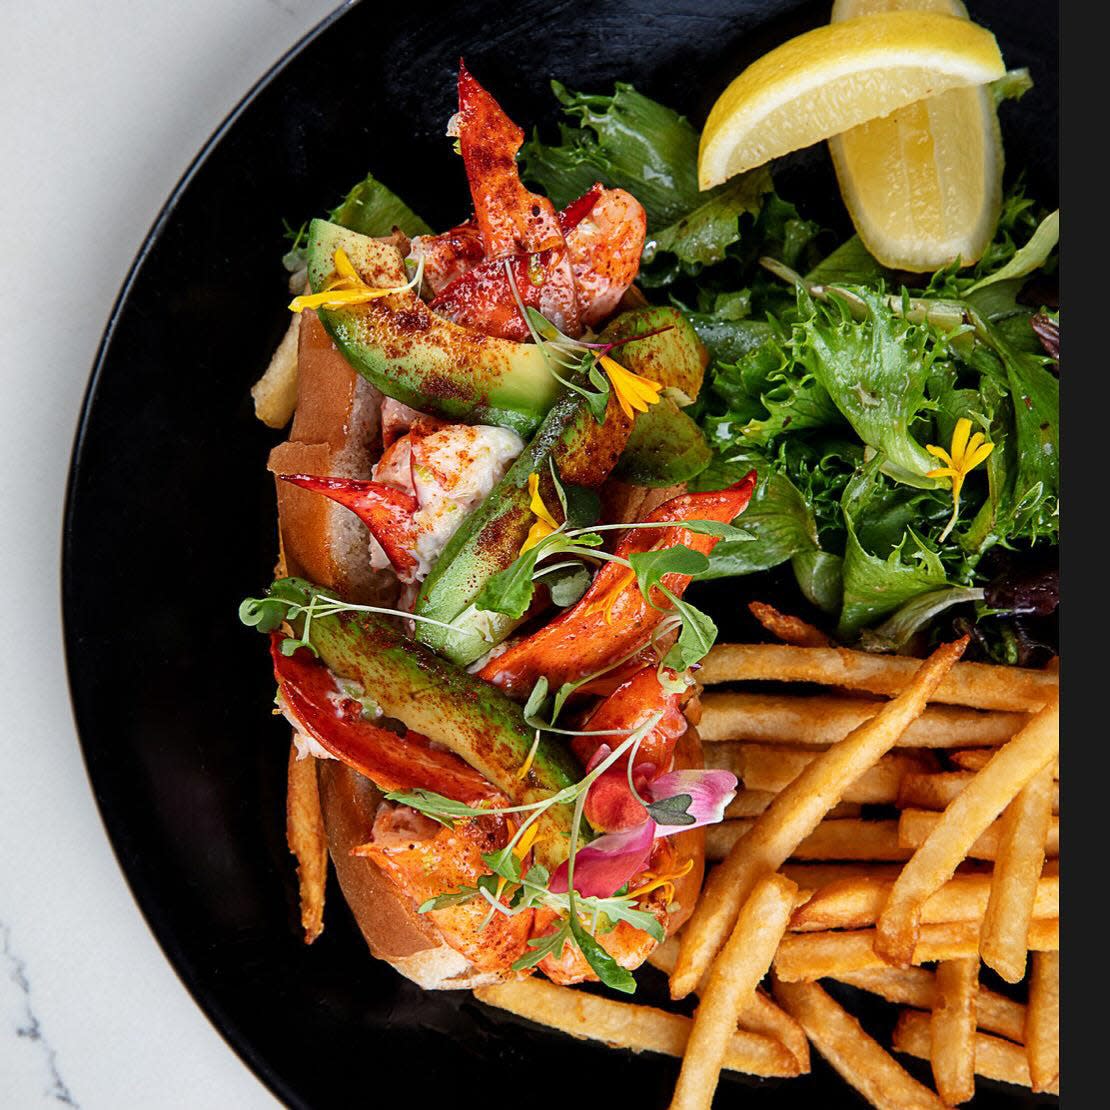 A lobster roll is among the Saturday brunch items at Acqua Cafe.